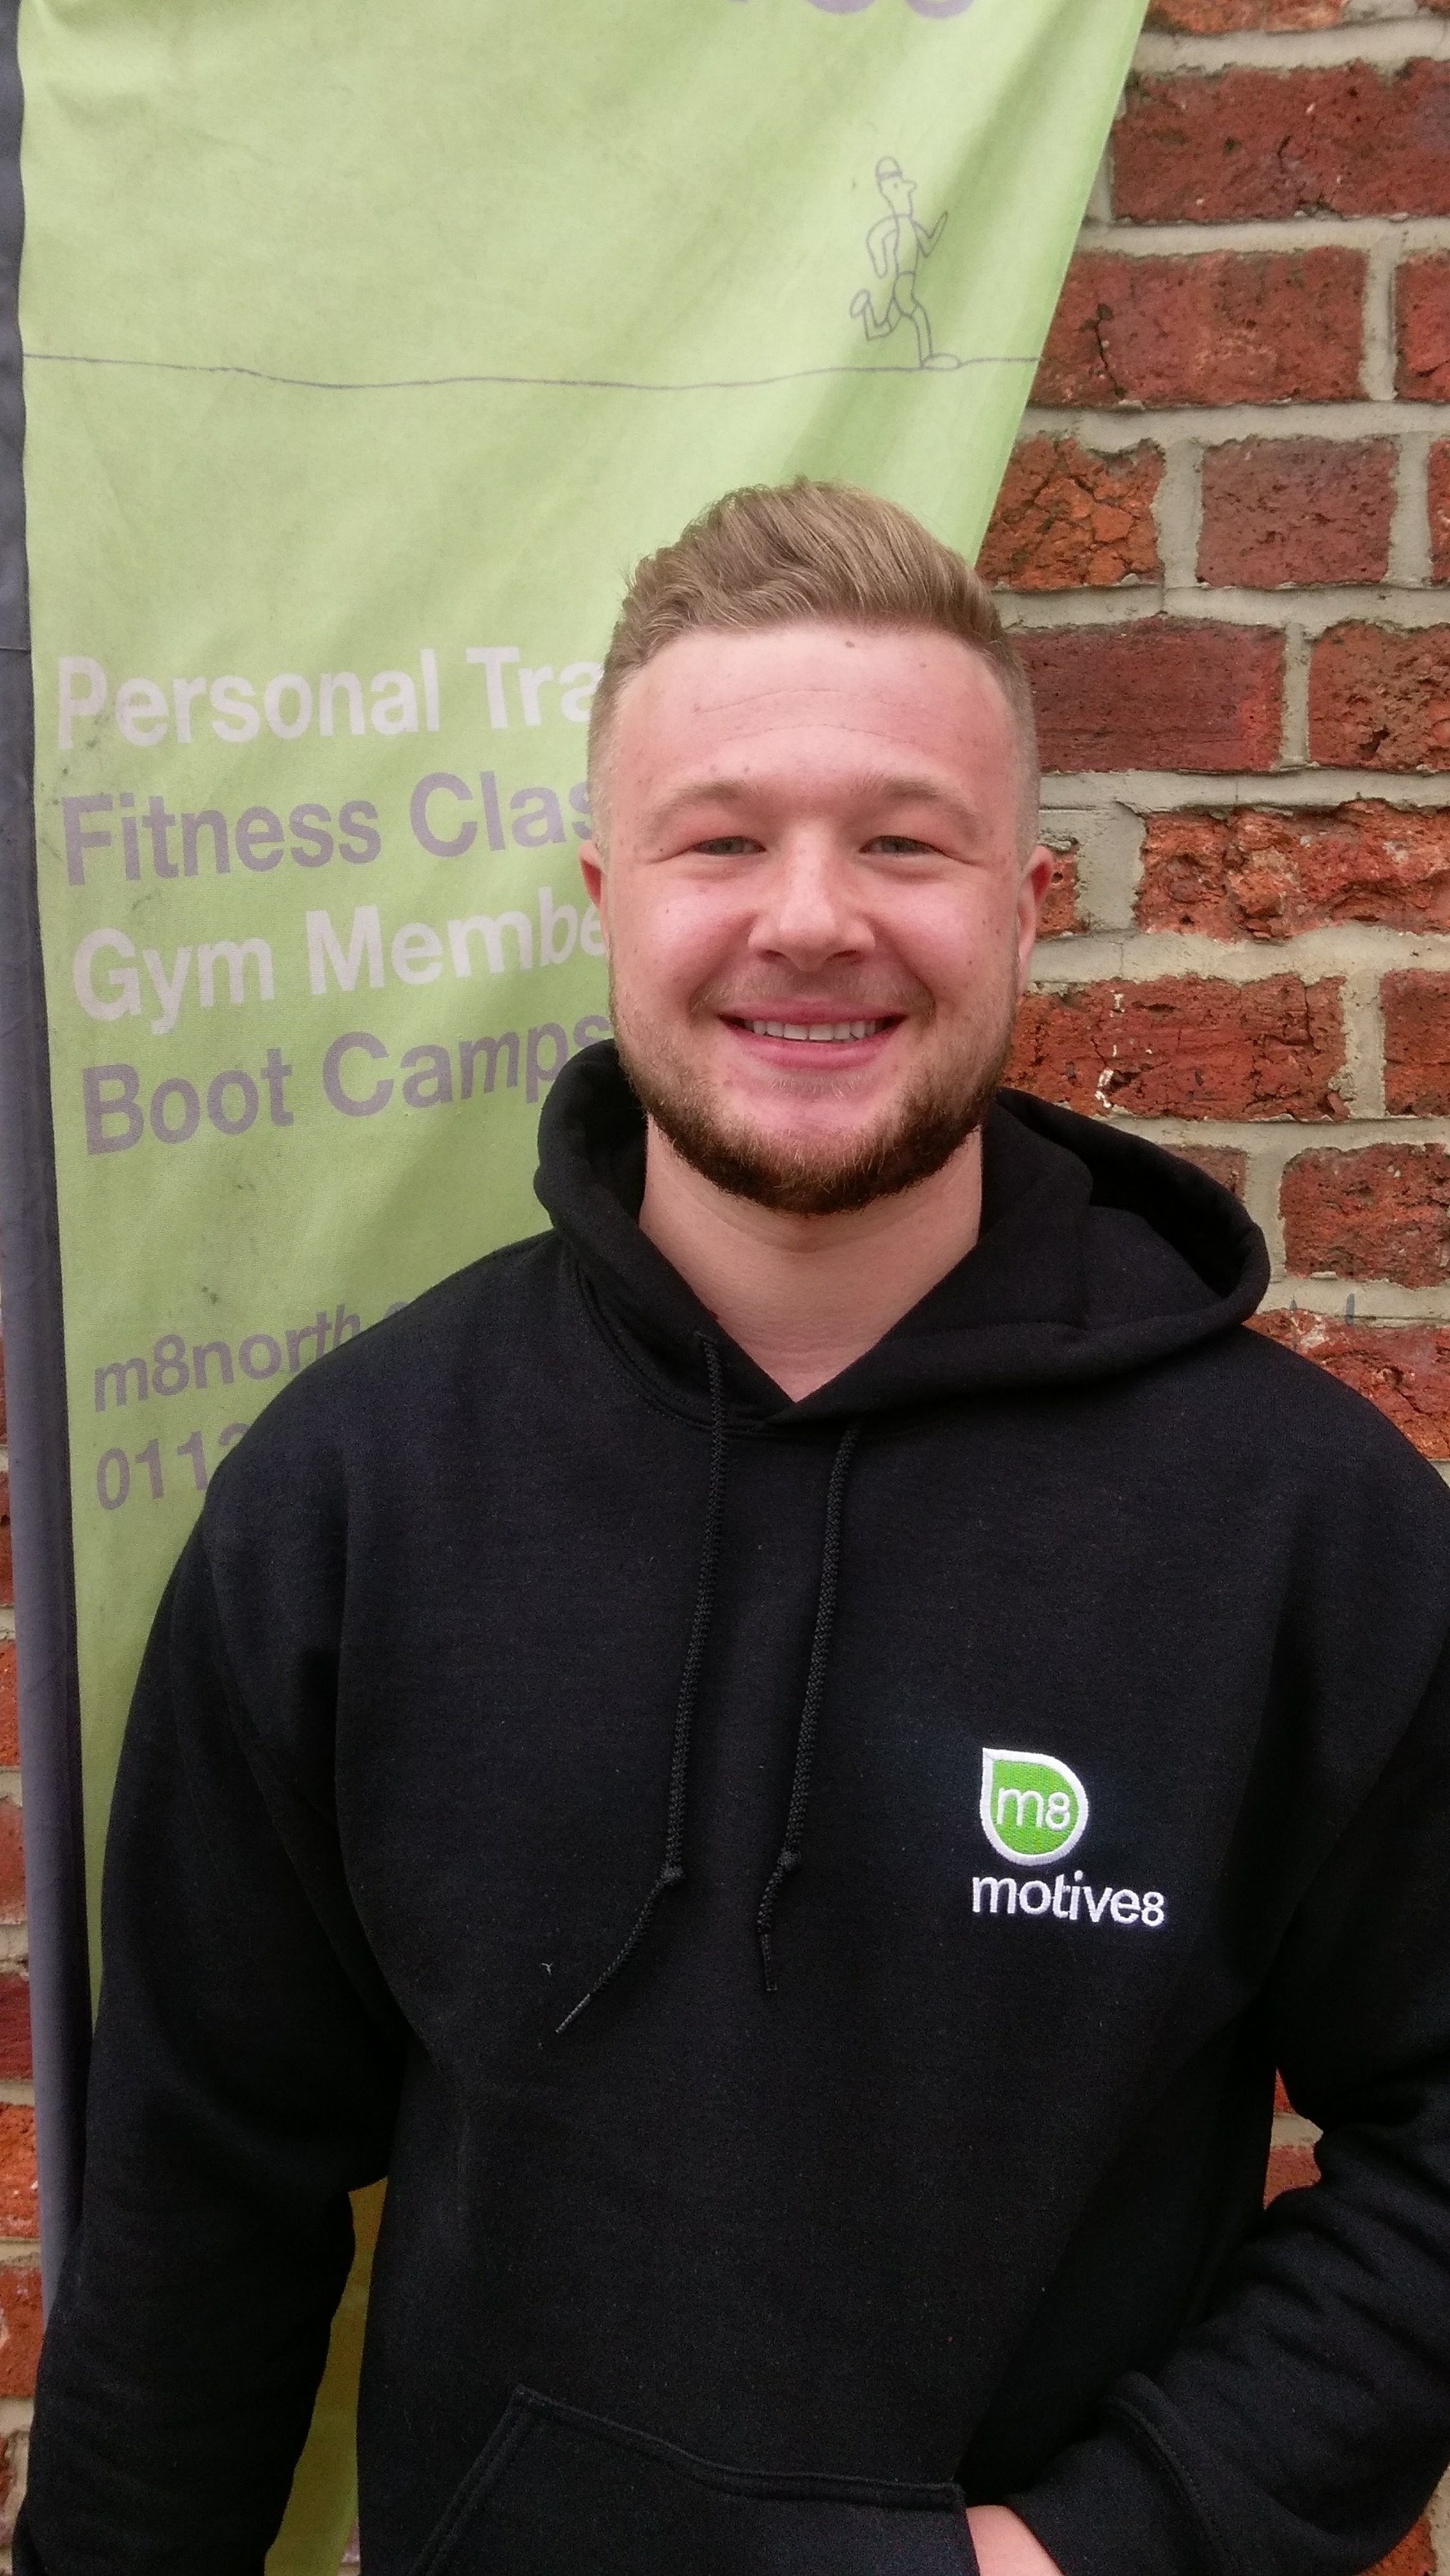 Welcome To Our New Personal Trainer Joe Motive8 North